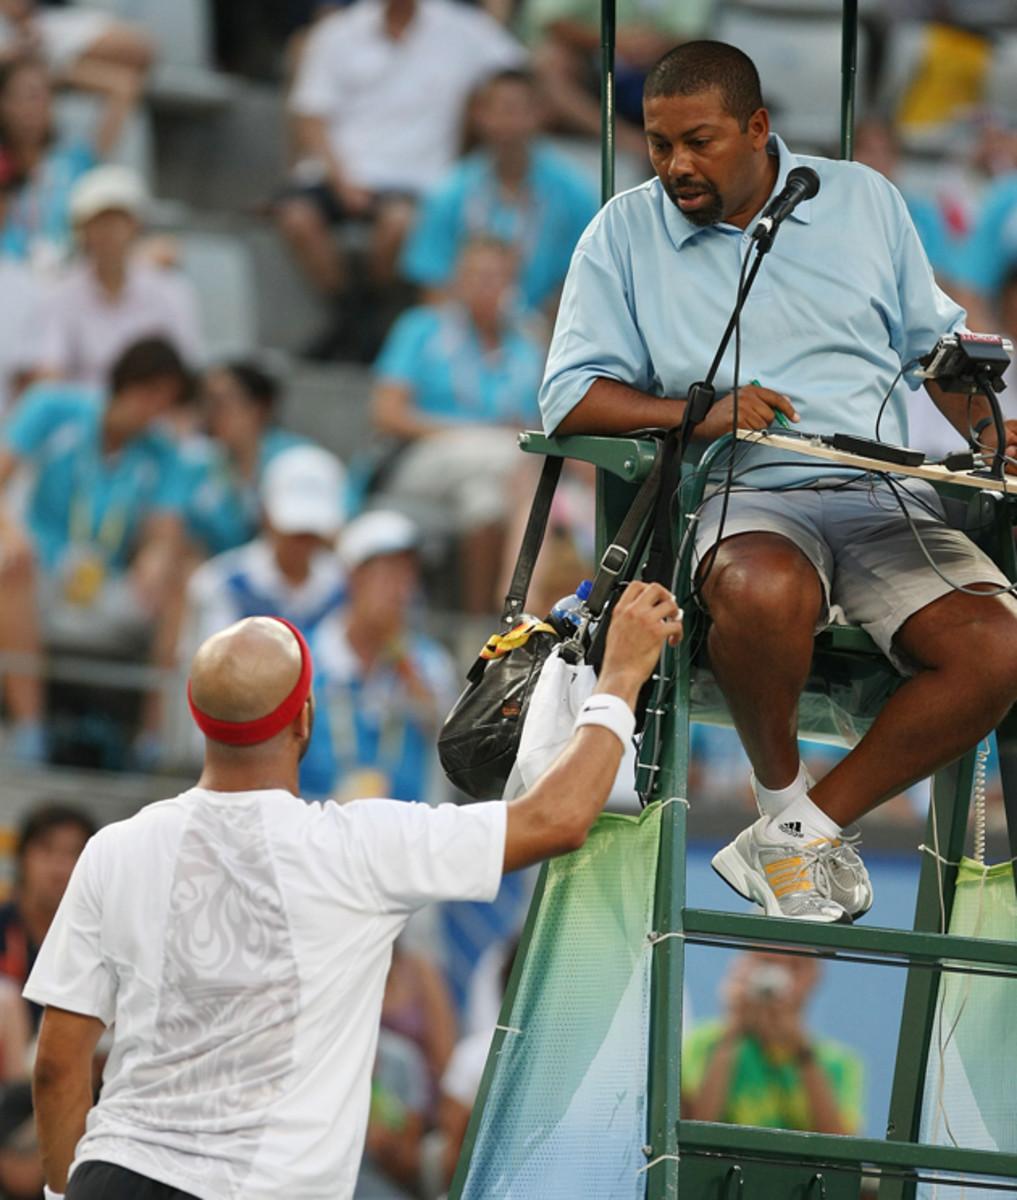 Blake discusses a call with the chair umpire during his semifinal match against Gonzalez.